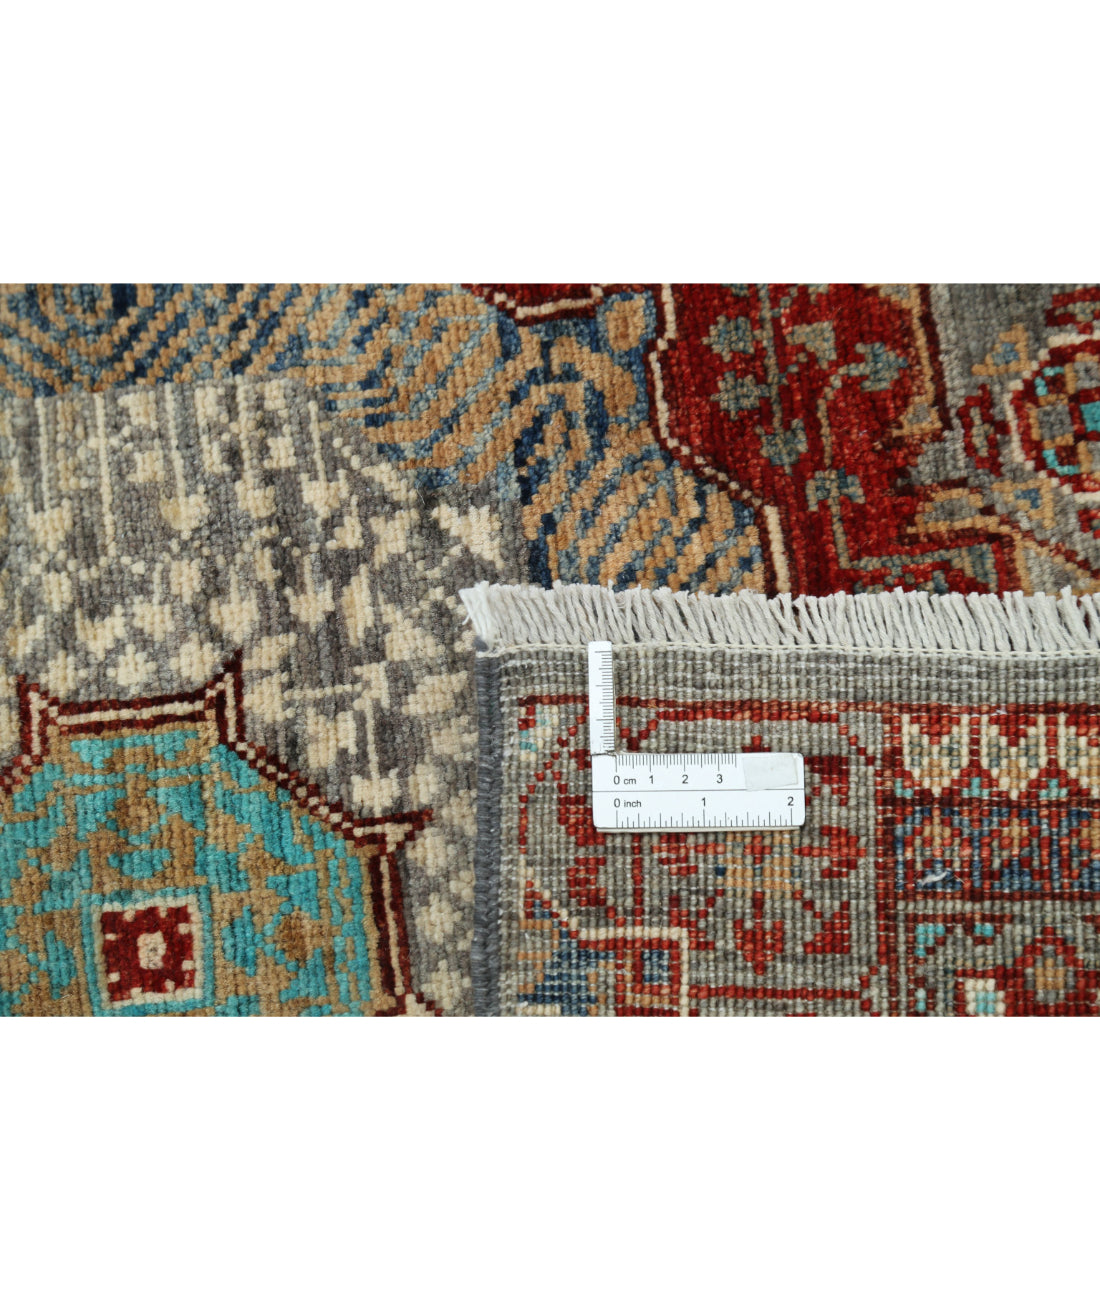 Hand Knotted Mamluk Wool Rug - 2'6'' x 19'6'' 2'6'' x 19'6'' (75 X 585) / Grey / Red